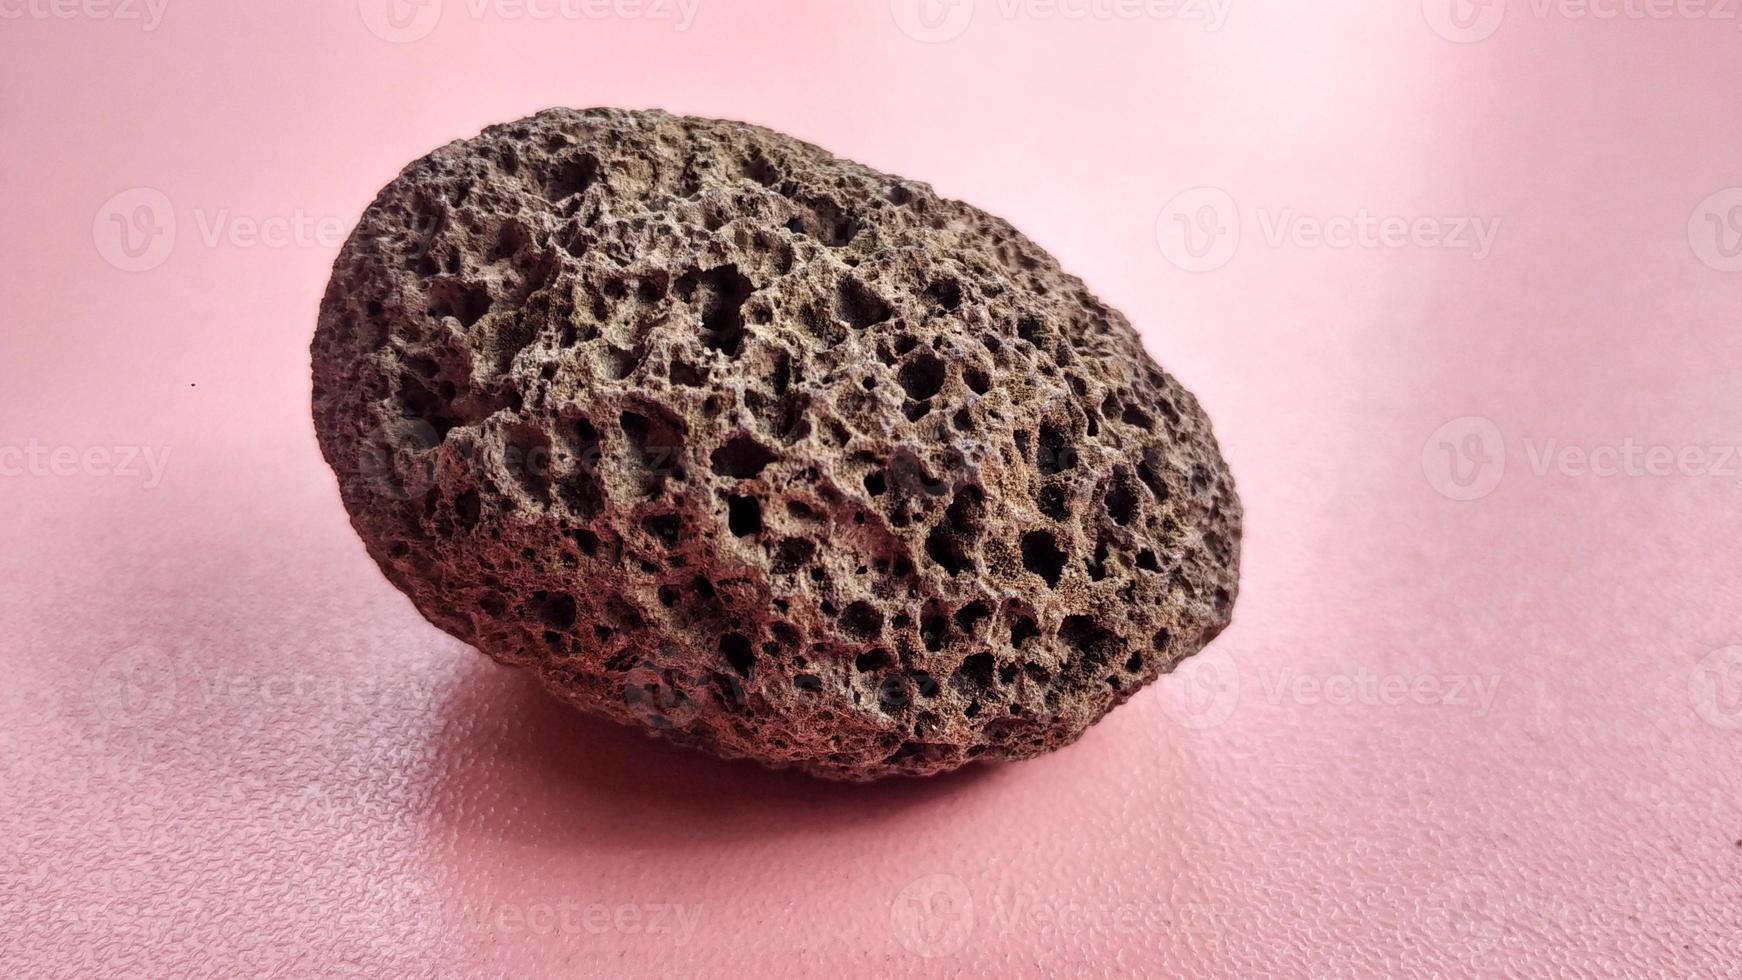 Oxide Scoria specimen, brown, rounded and weighs light , is a volcanic rock that consists of highly vesicular rough textured volcanic glass, which may or may not contain crystals, Indonesia Mountain photo